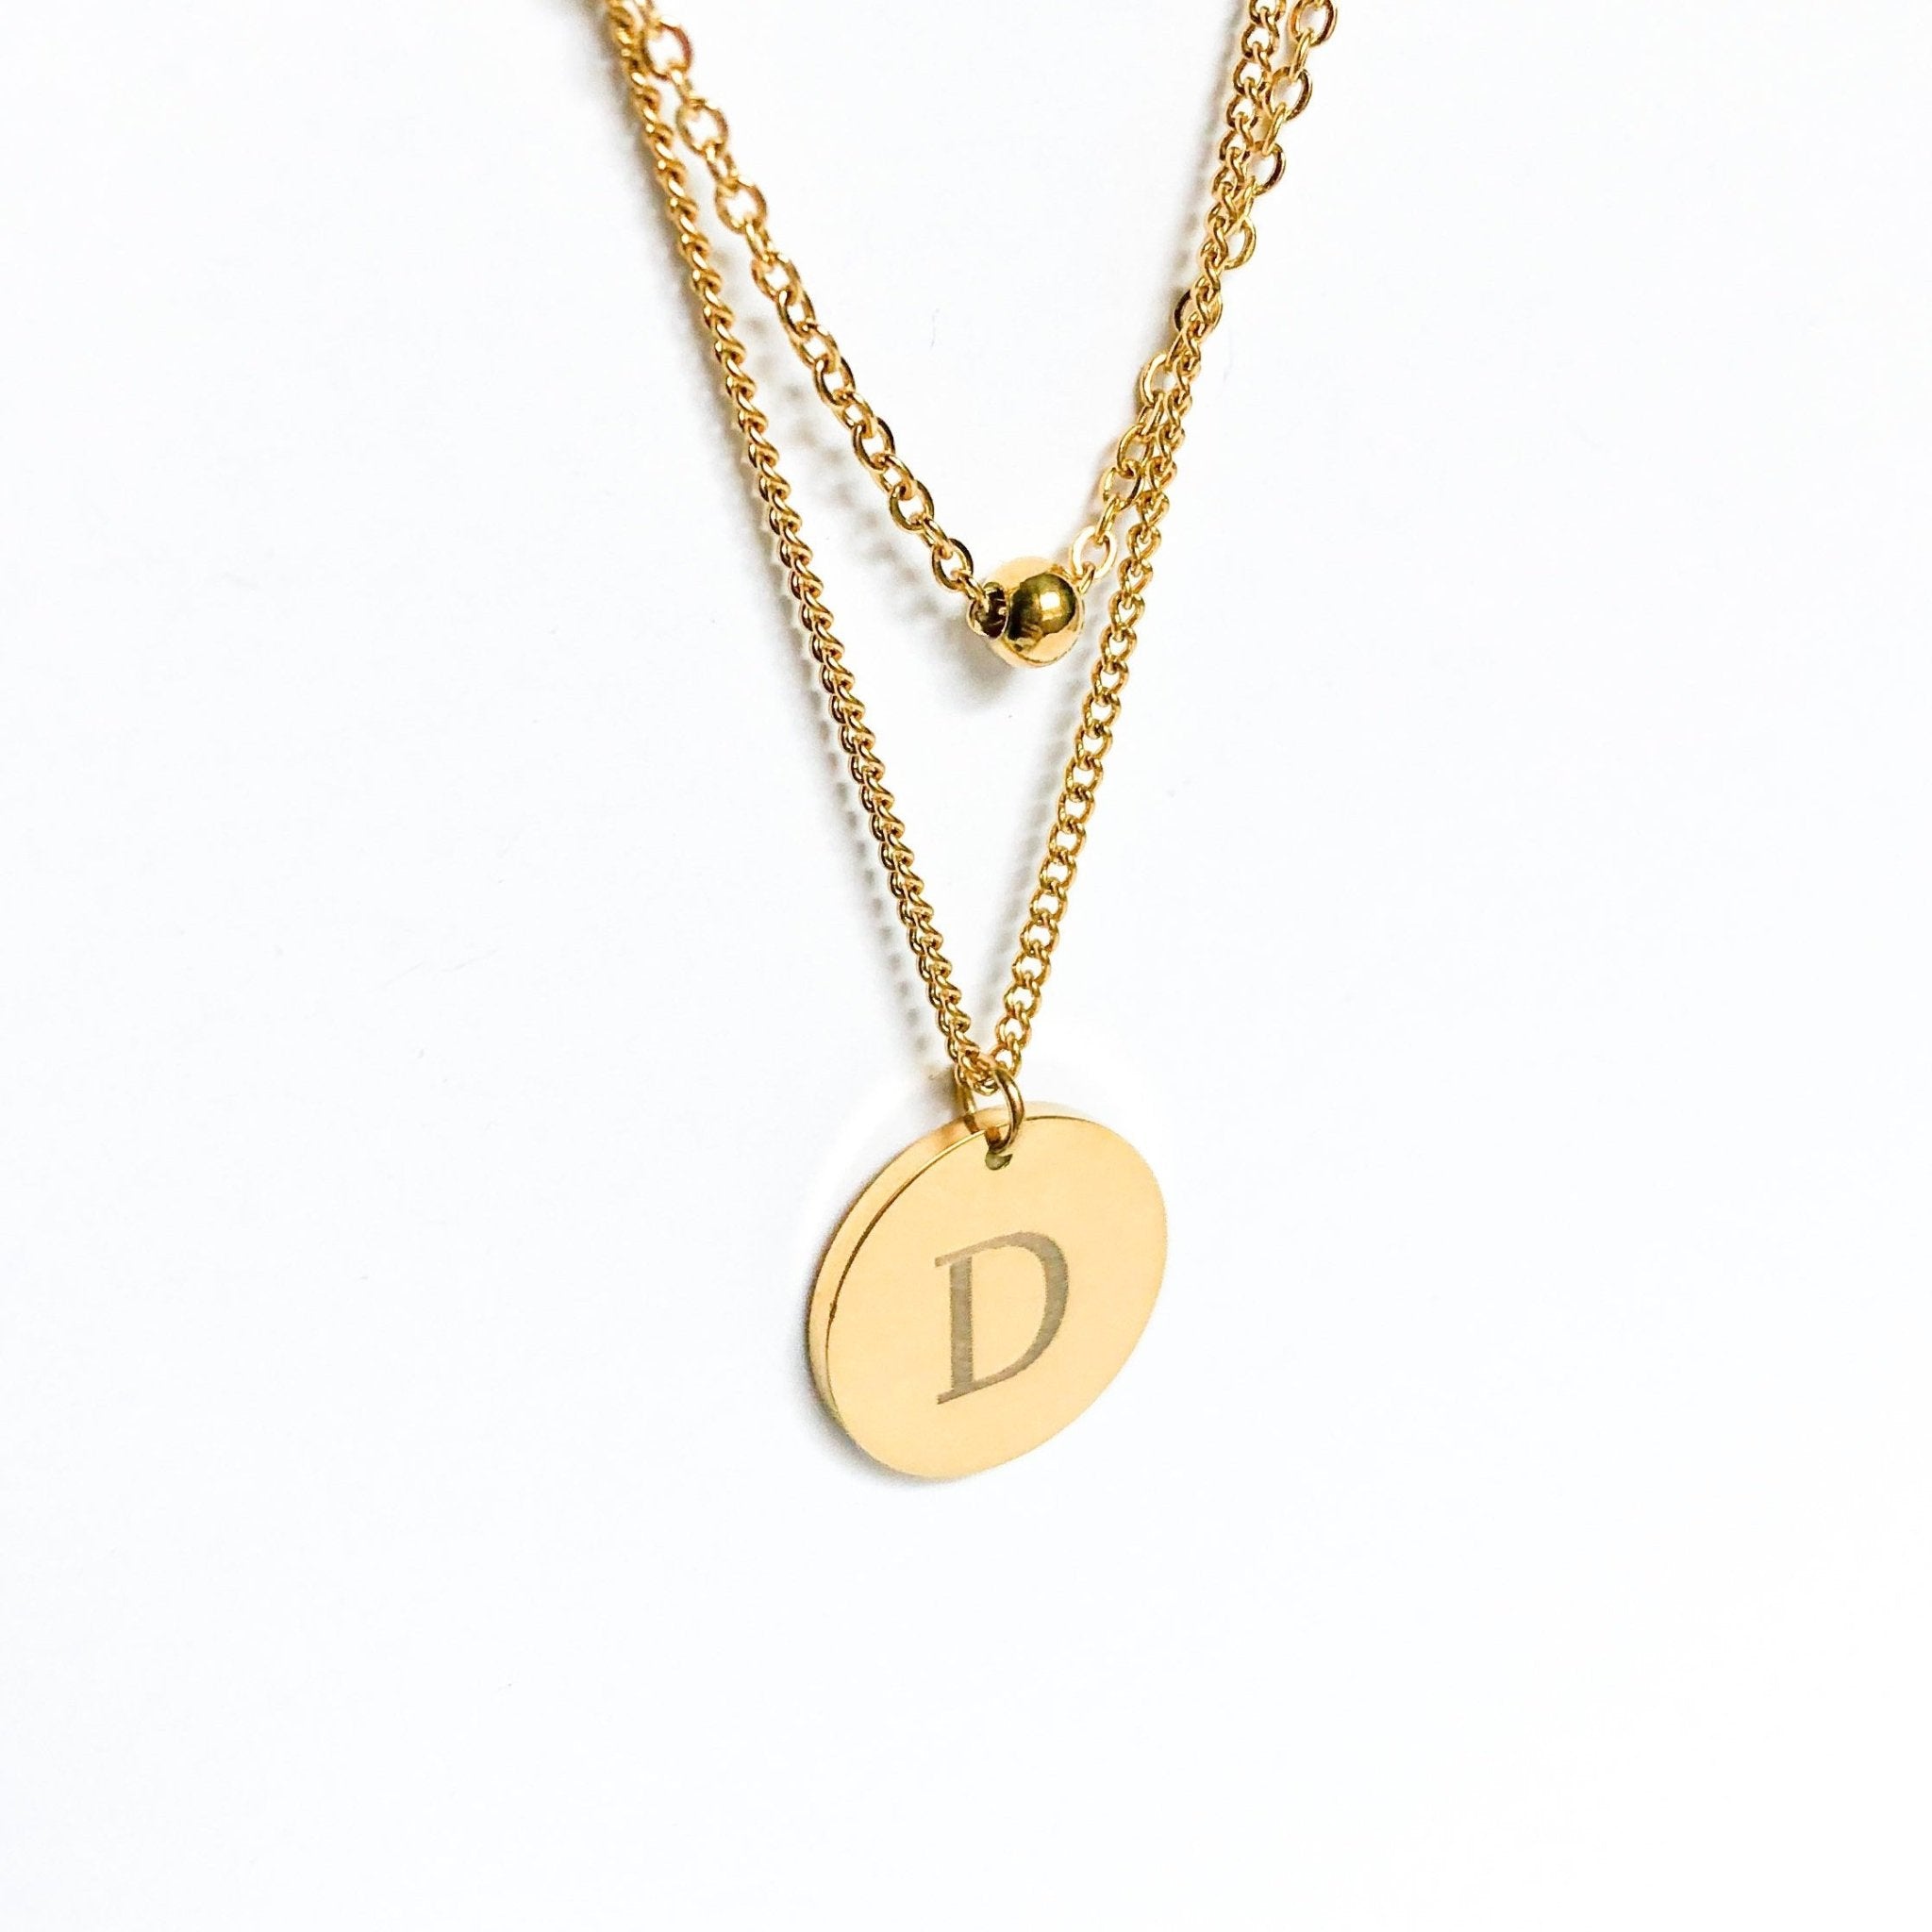 Customized Initial Layered Necklace - Flaire & Co.